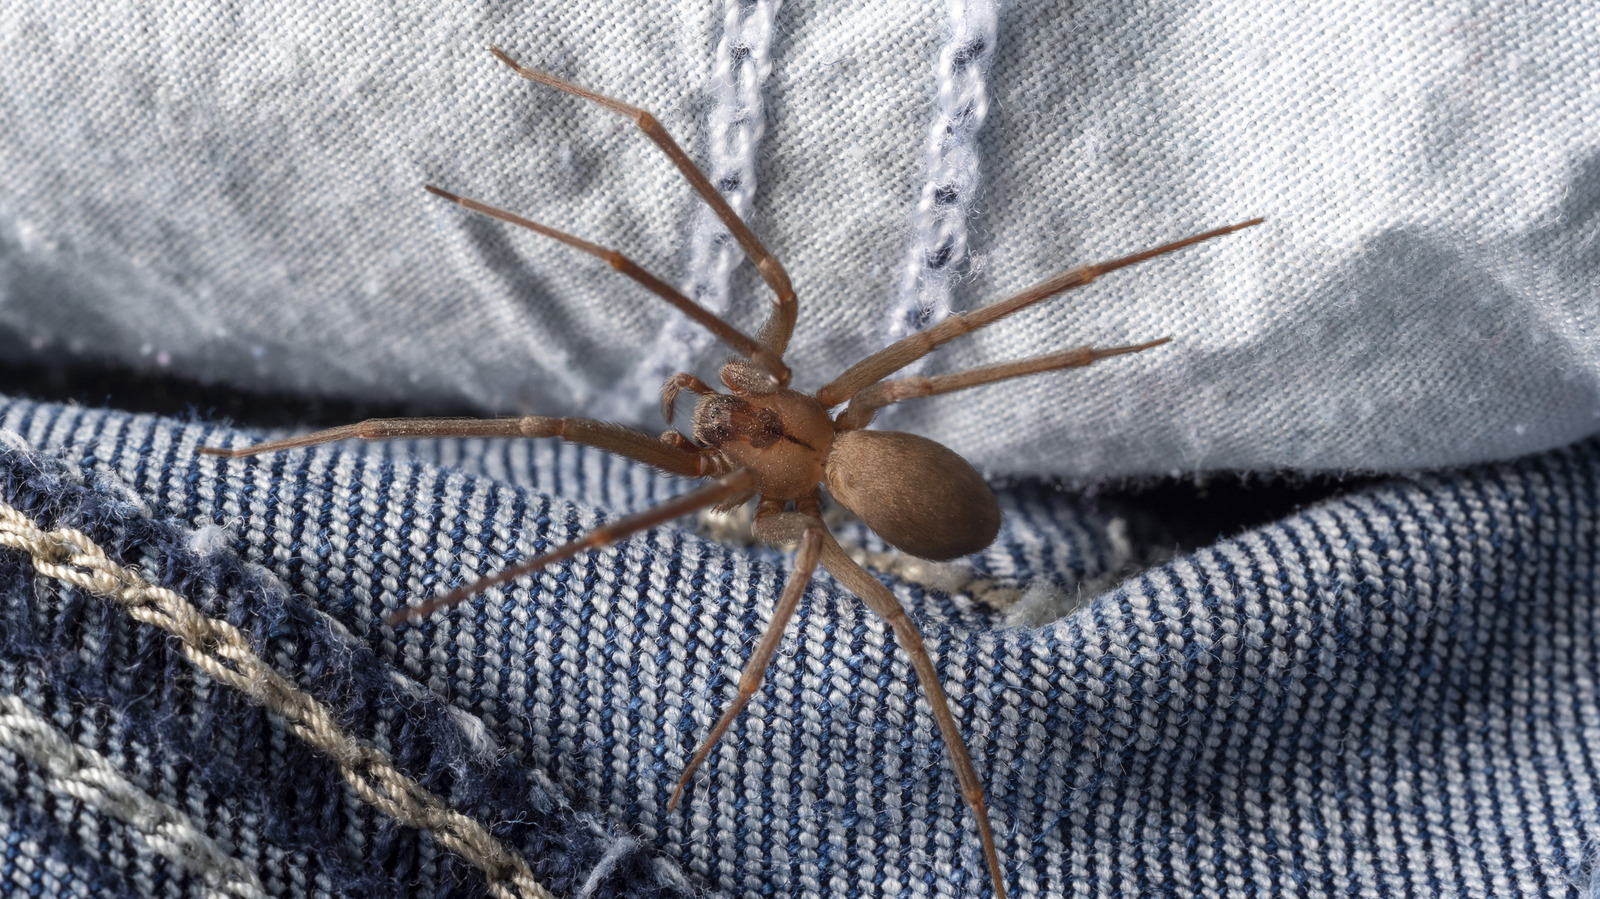 The Easiest Way To Keep Brown Recluse Spiders From Invading Your Home